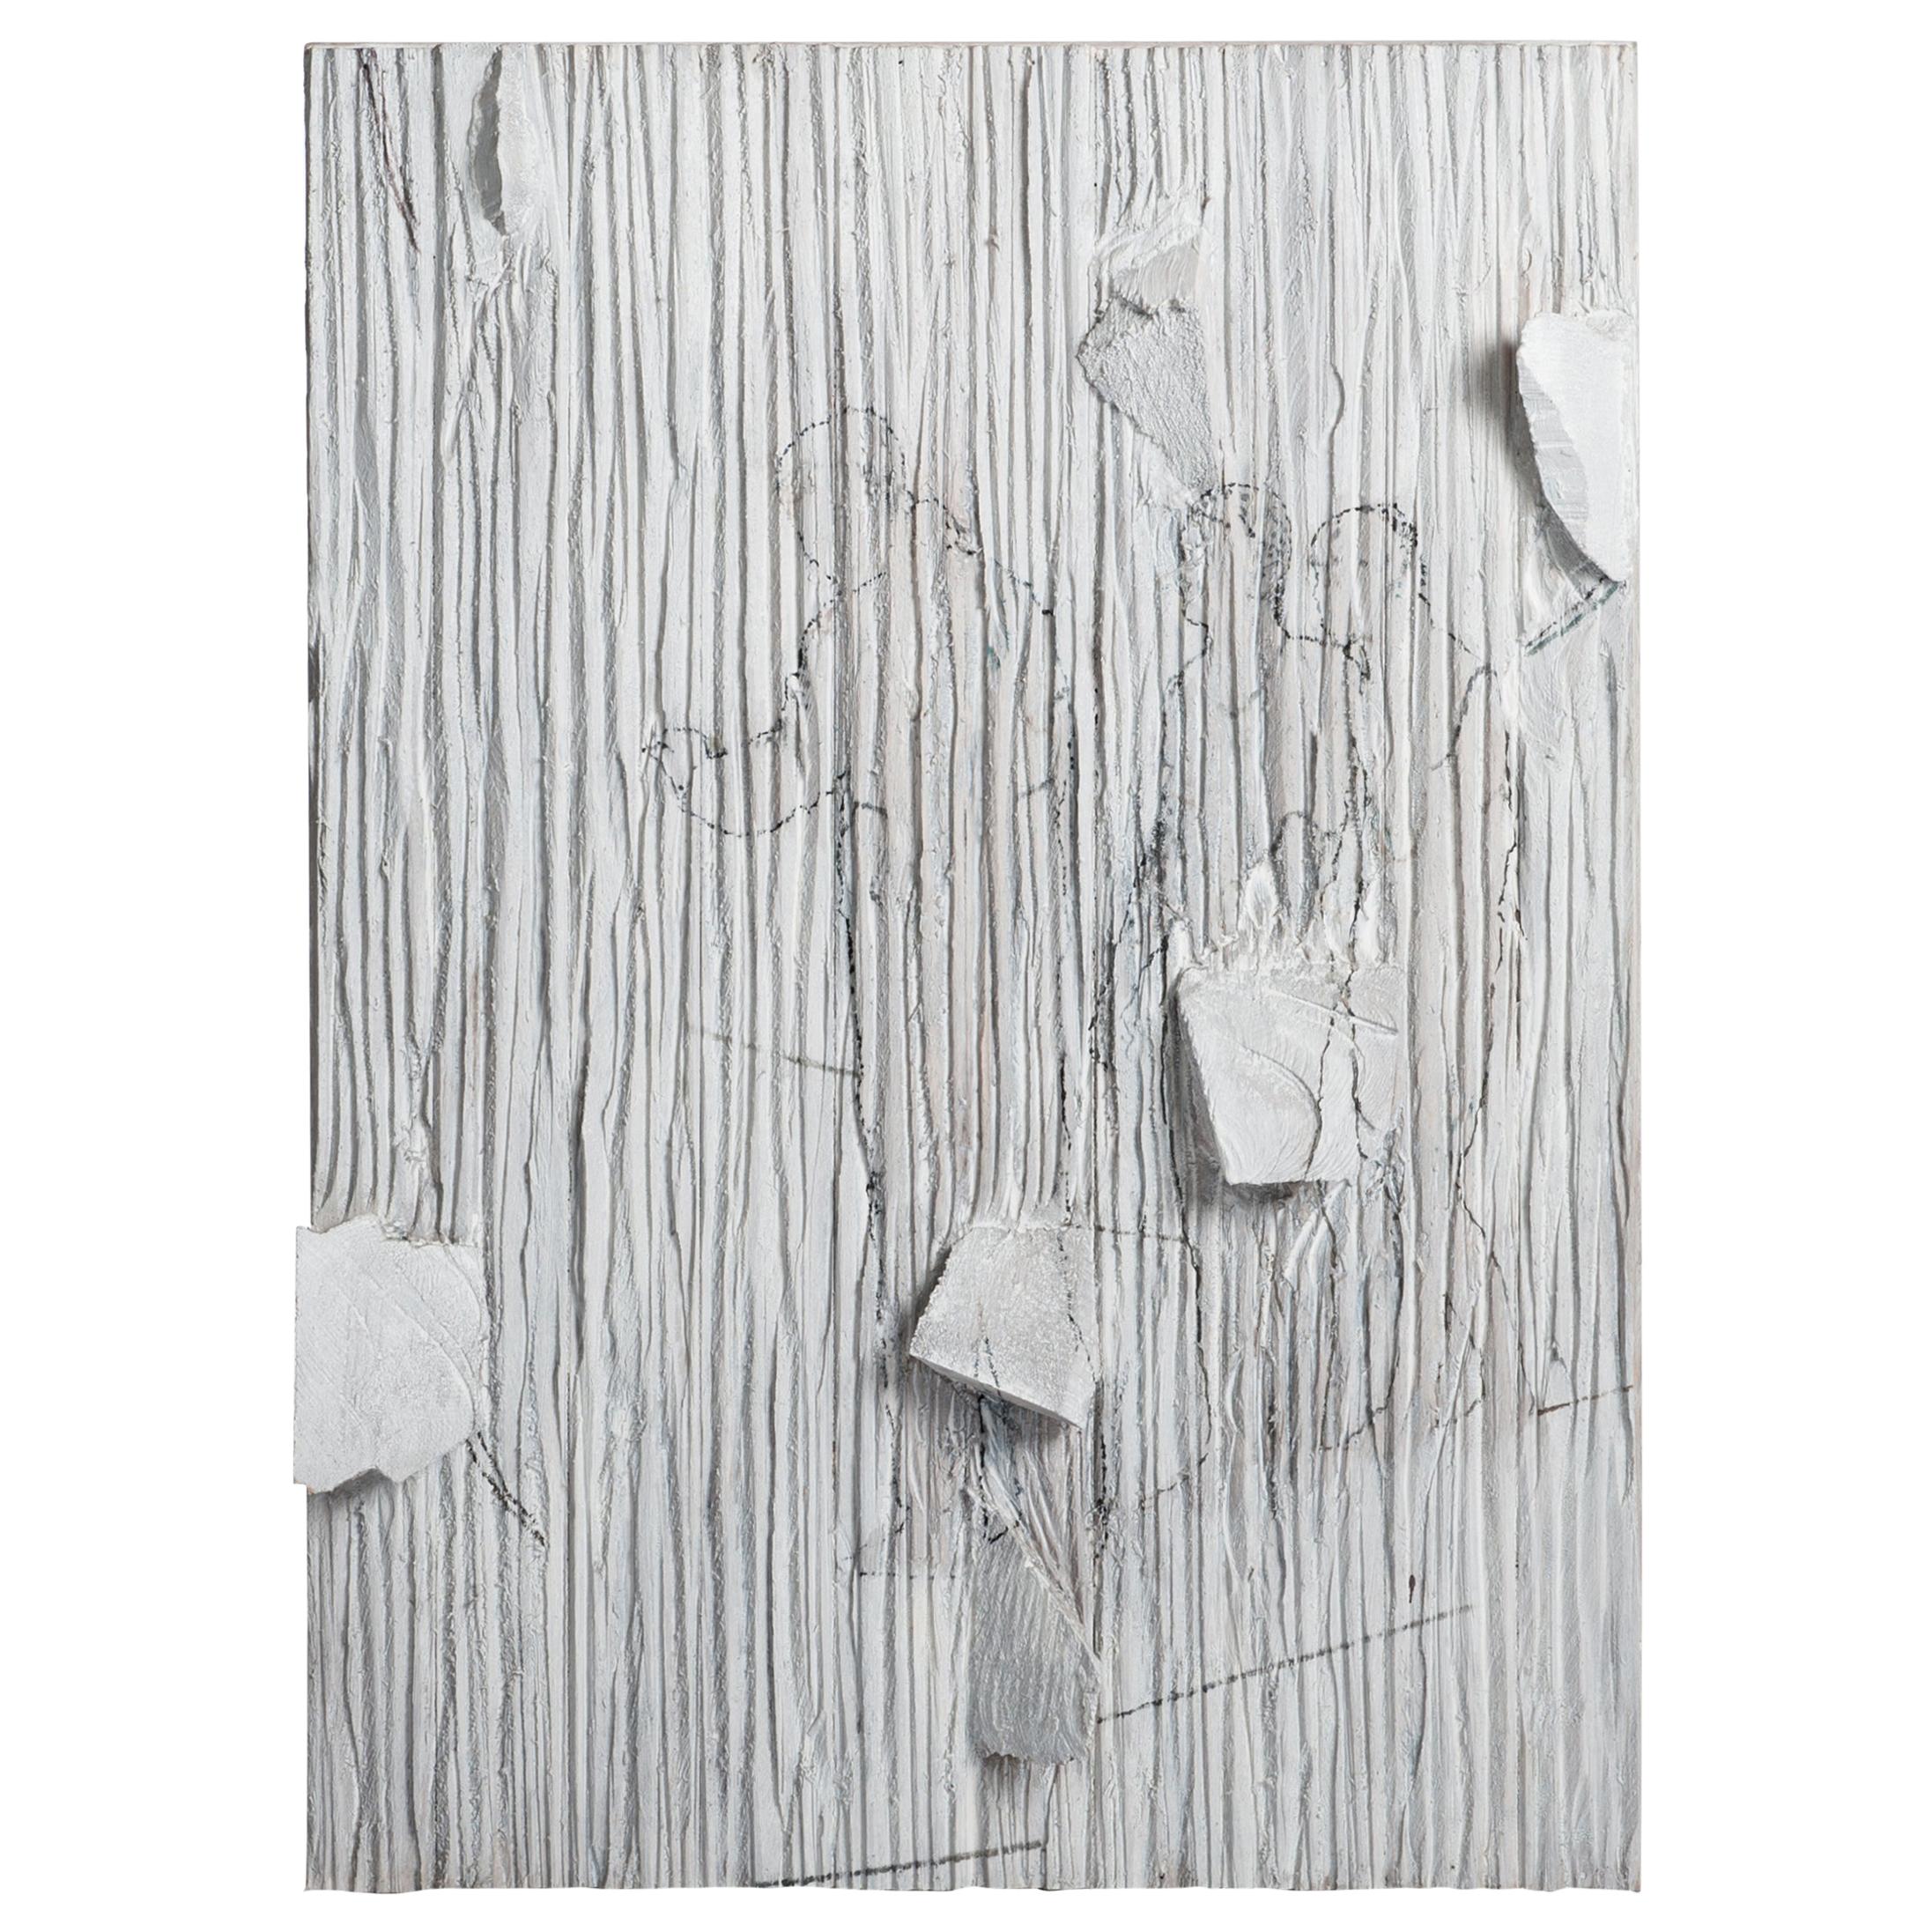 Contemporary Wooden Sculpture-Painting in Light-Grey by Christofer Kochs